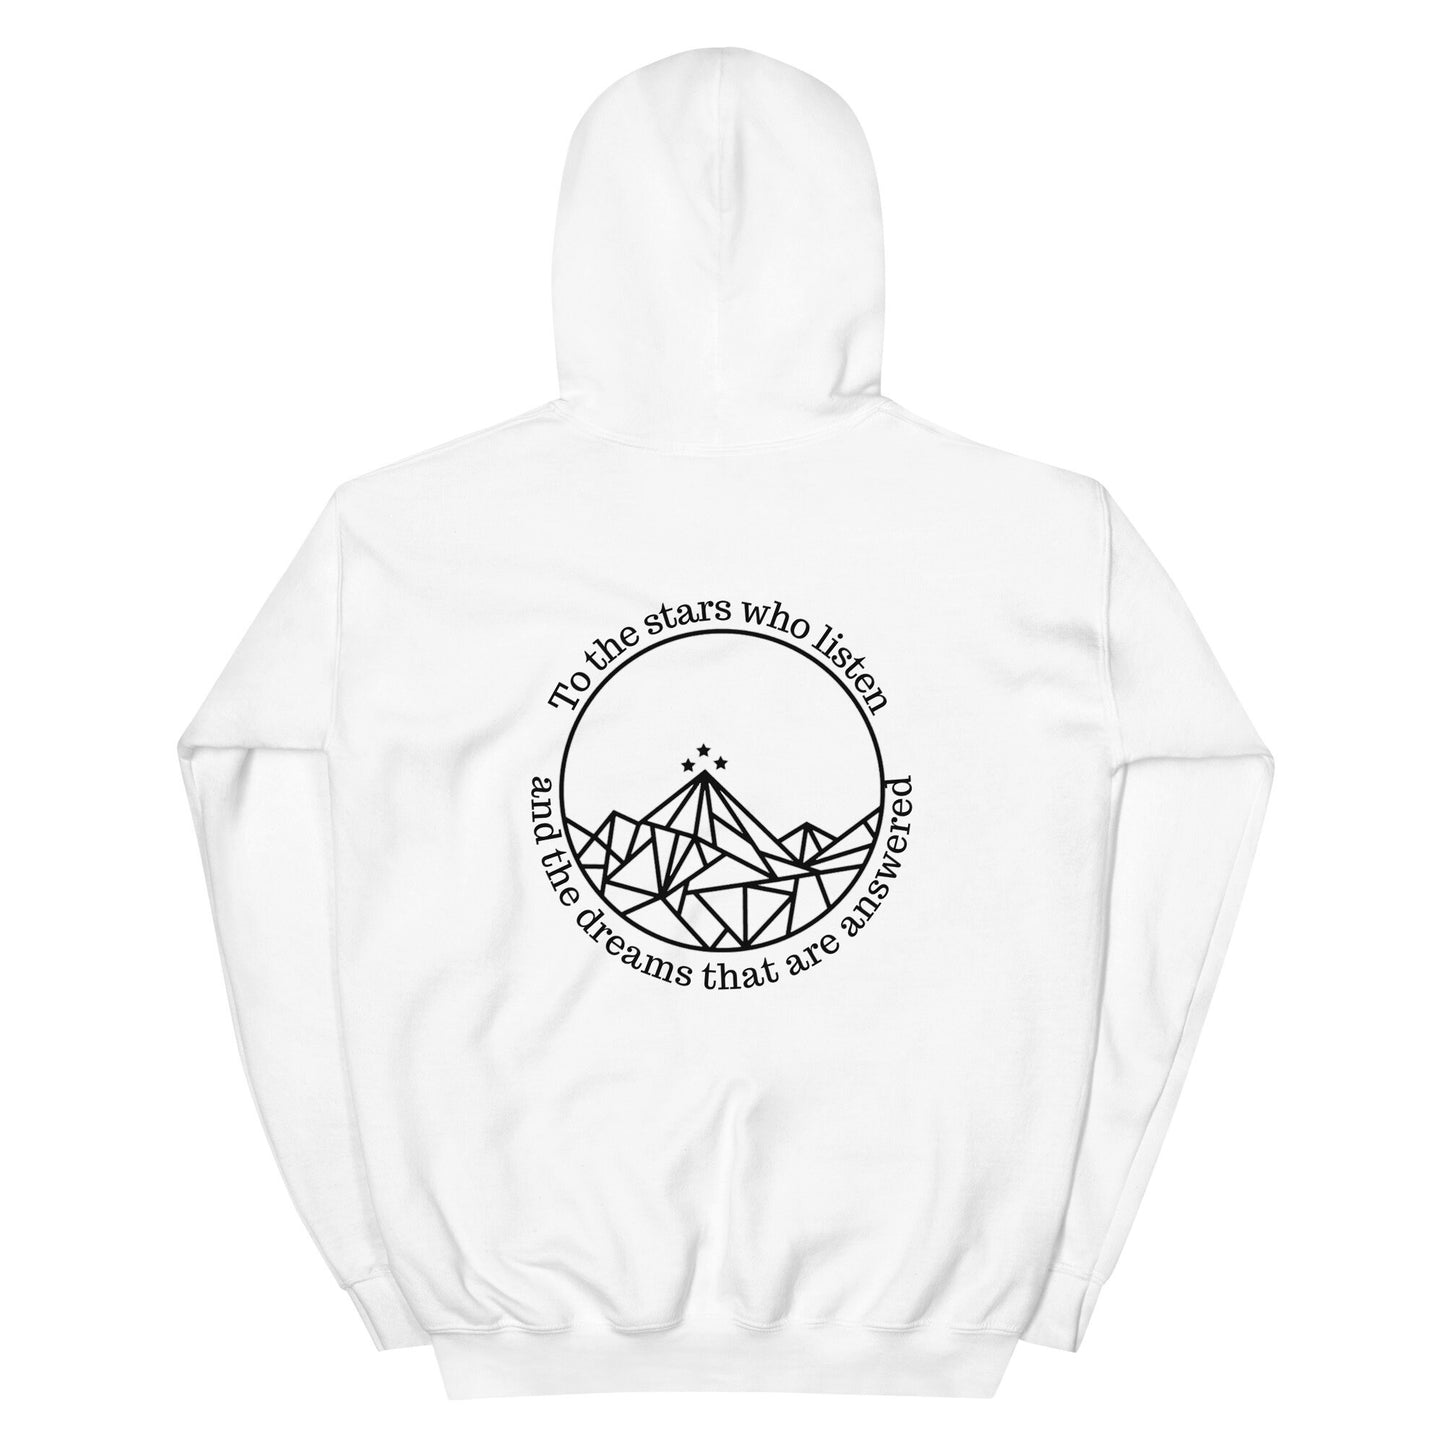 ACOTAR ACOSF White Hoodie Back image To the Stars quote with Night Court Mountains image